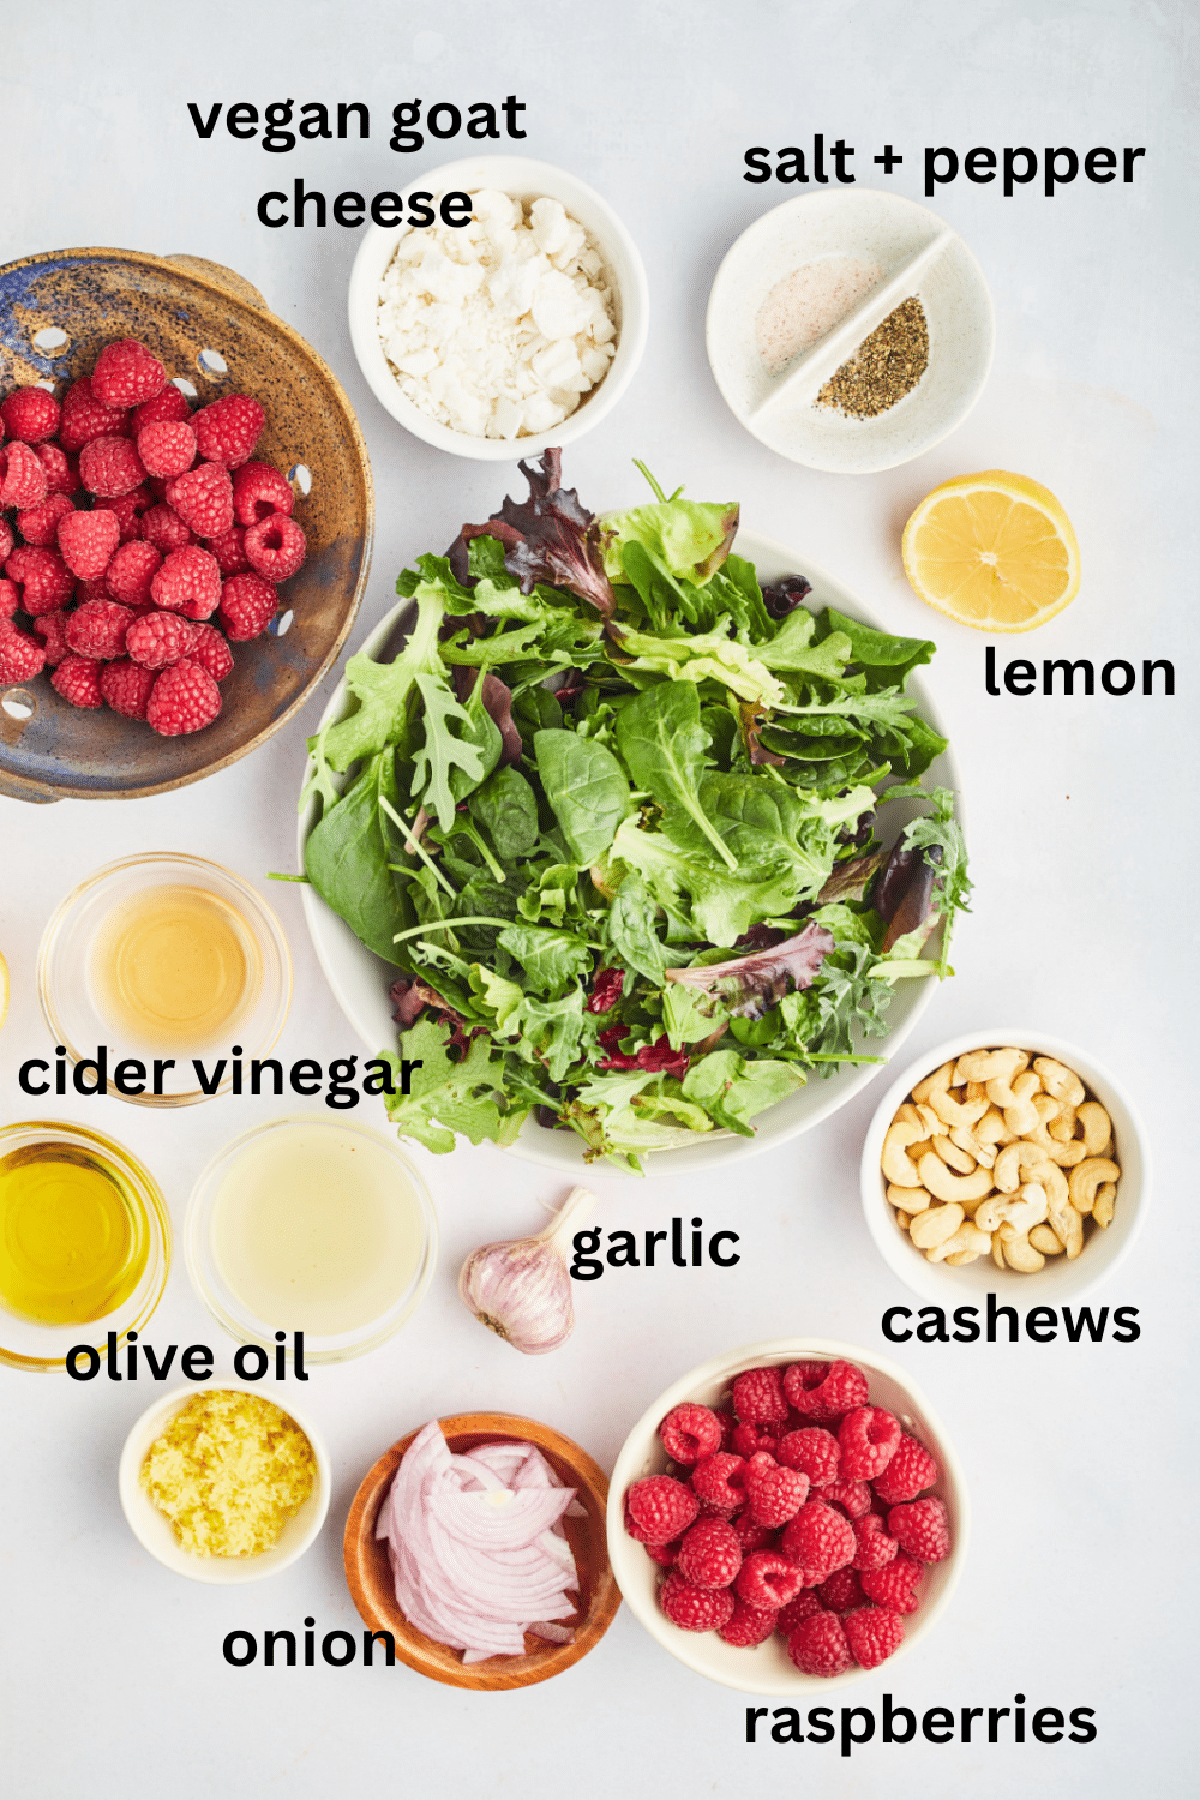 Overhead view of ingredients to make a roasted garlic raspberry salad: mixed greens, vegan goat cheese, fresh raspberries, salt and pepper, lemons, cashews, garlic, apple cider vinegar, olive oil, and red onion.